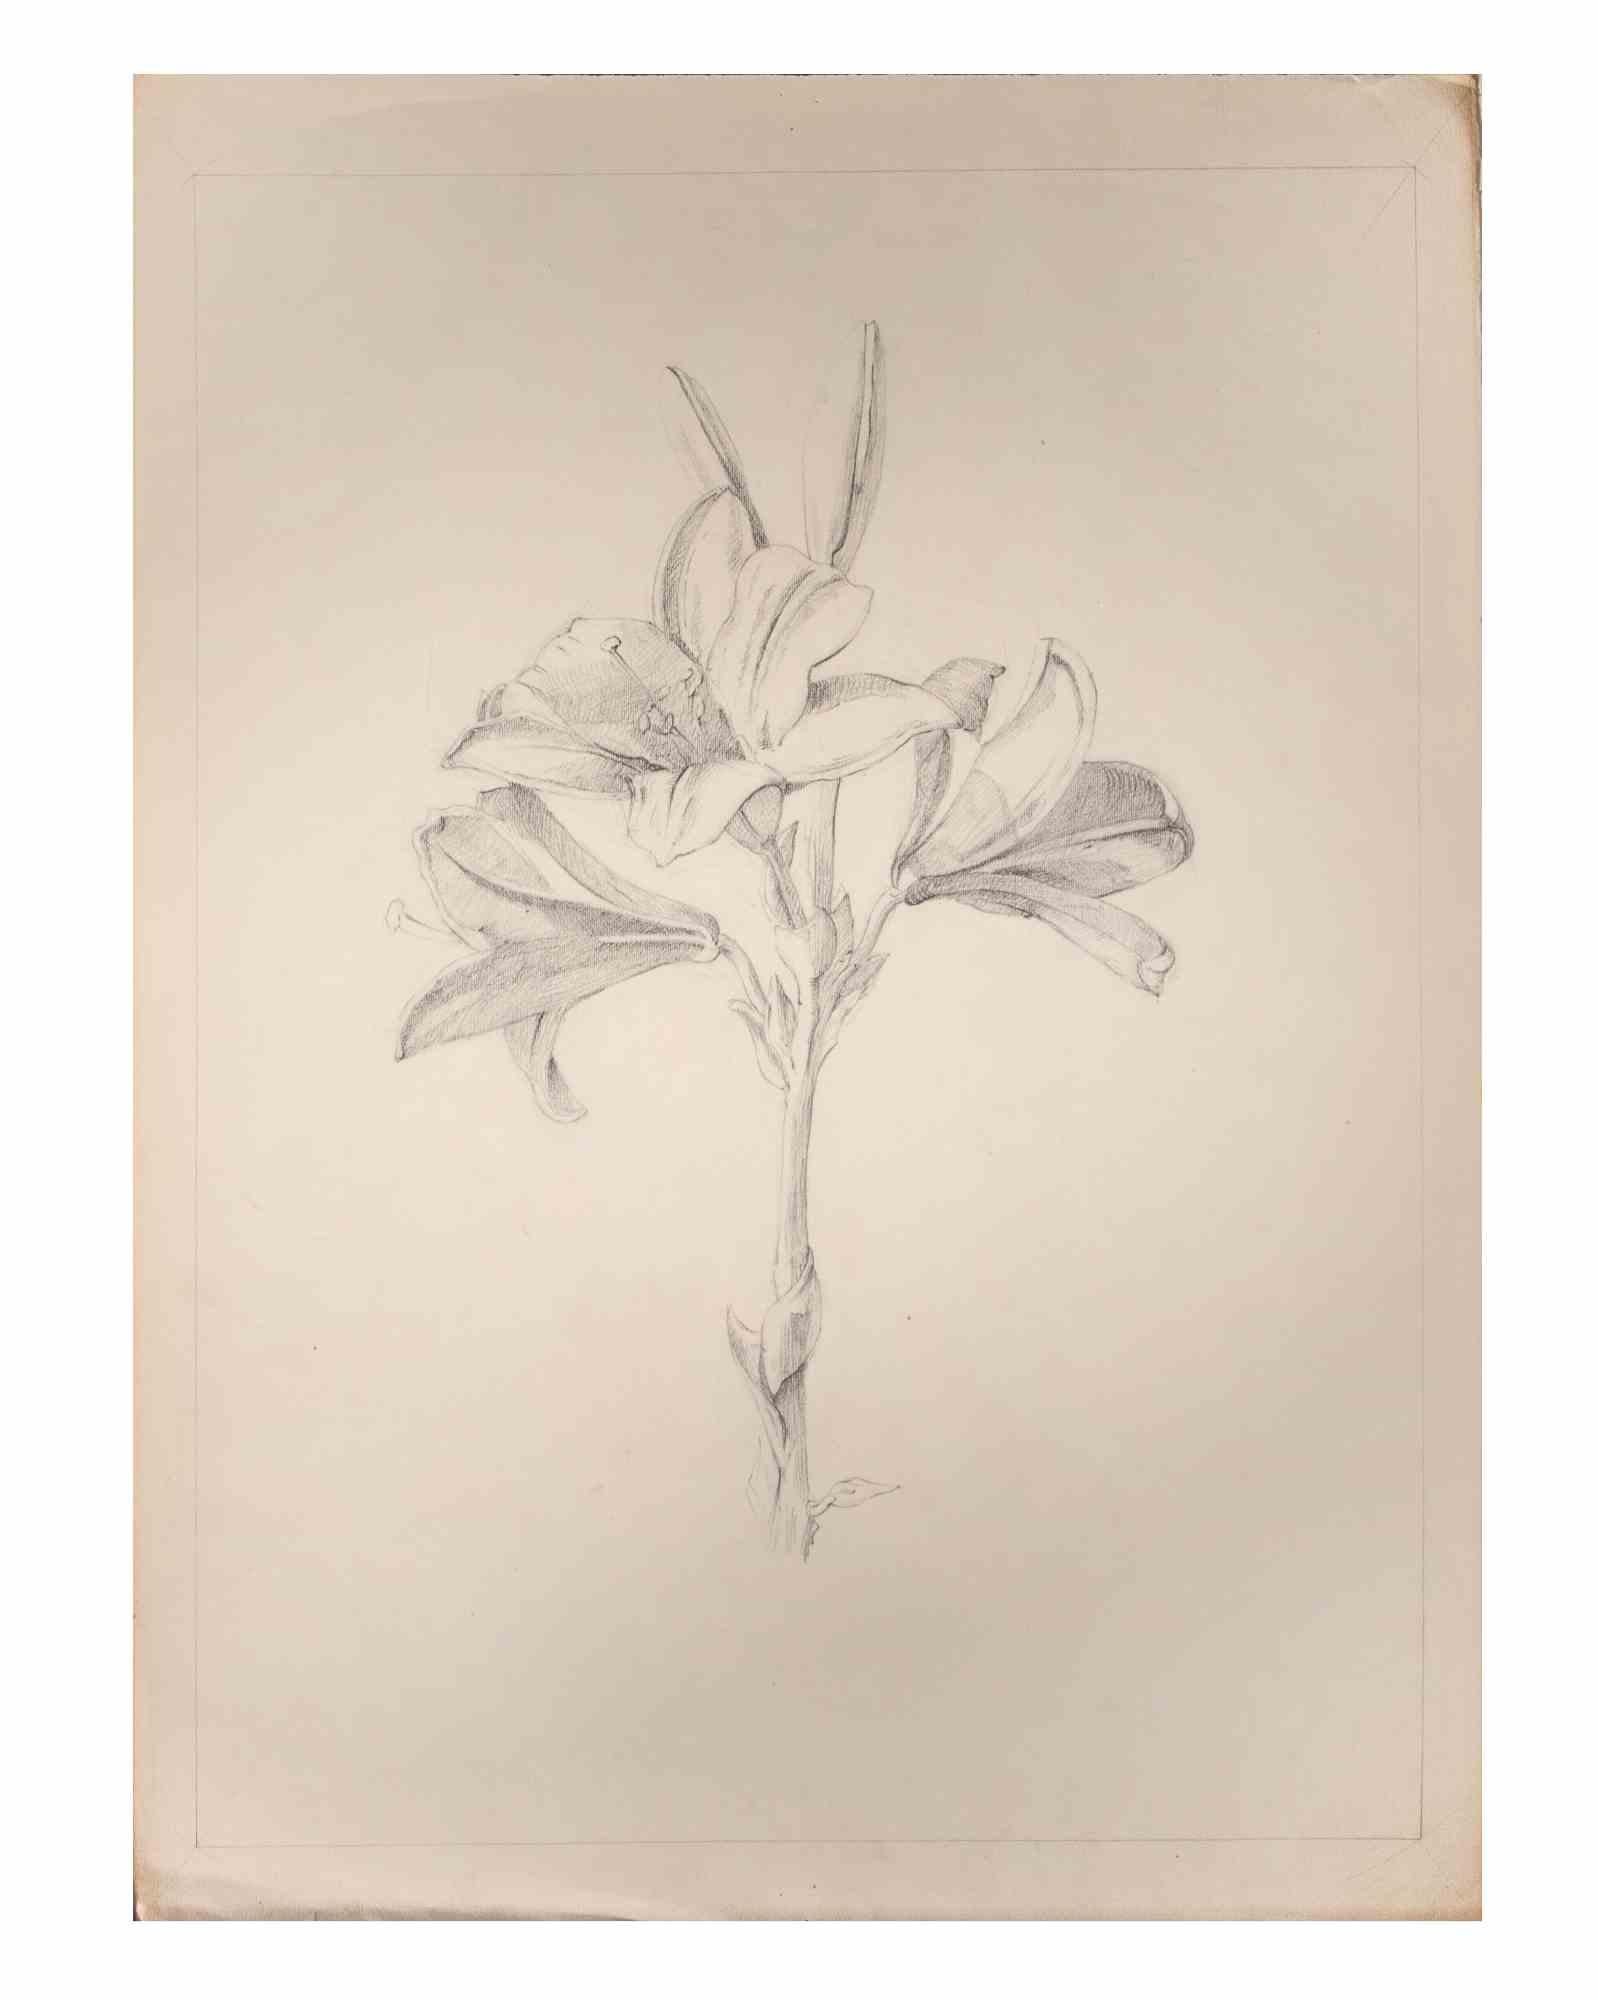 Lily is an Artwork realized by the Italian Artist Aurelio Mistruzzi in 1905.

Pencil Drawing on paper .

Good conditions.

Aurelio Mistruzzi (1880-1960) studied at the Udine Art School, having classes with the Sculptor De Paoli. He moved to Venice